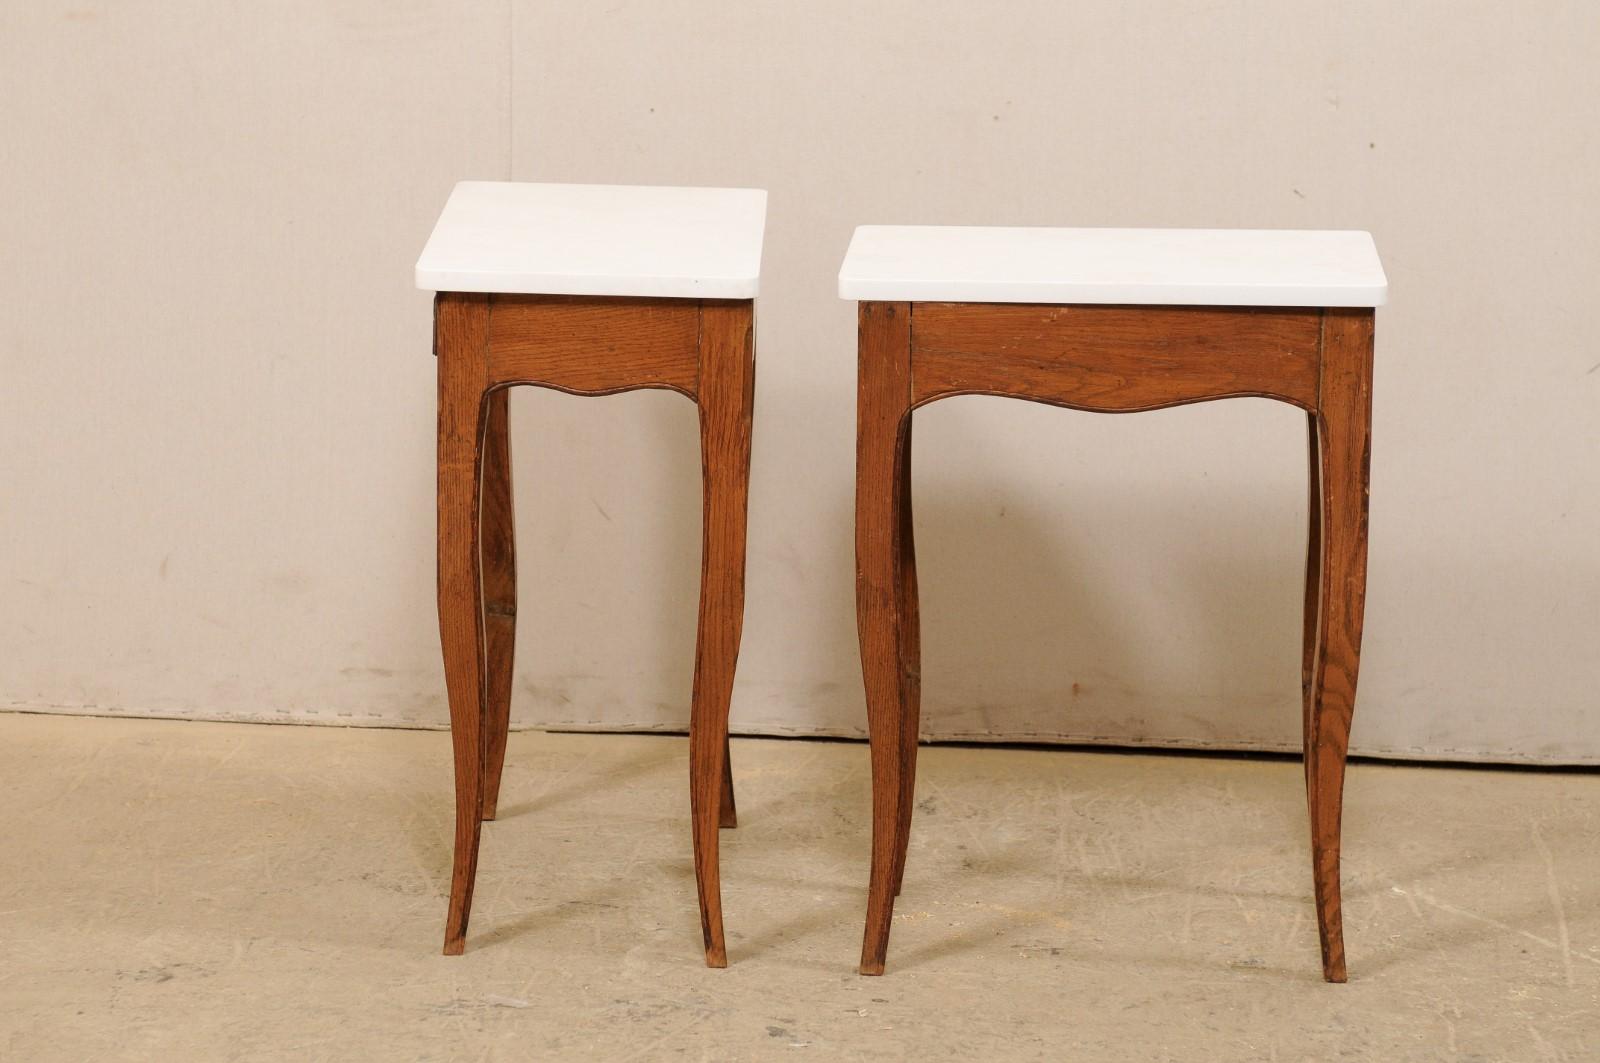 Pair of 1920s French Single-Drawer Side Tables with New White Quartz Tops For Sale 4